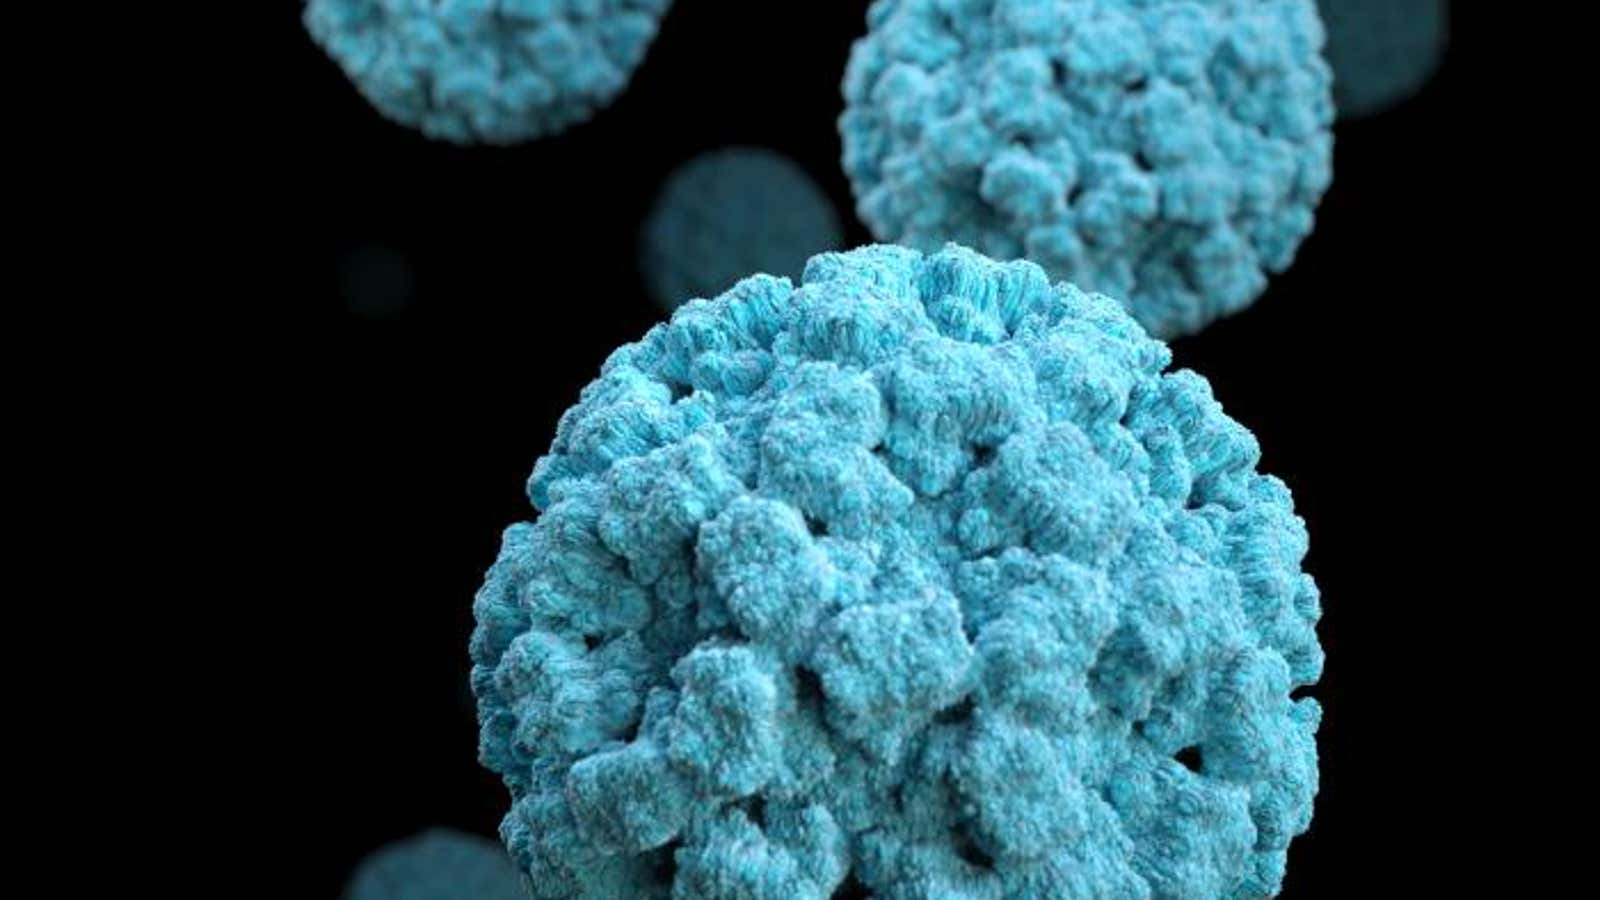 Viruses like norovirus are much more potent in groups.